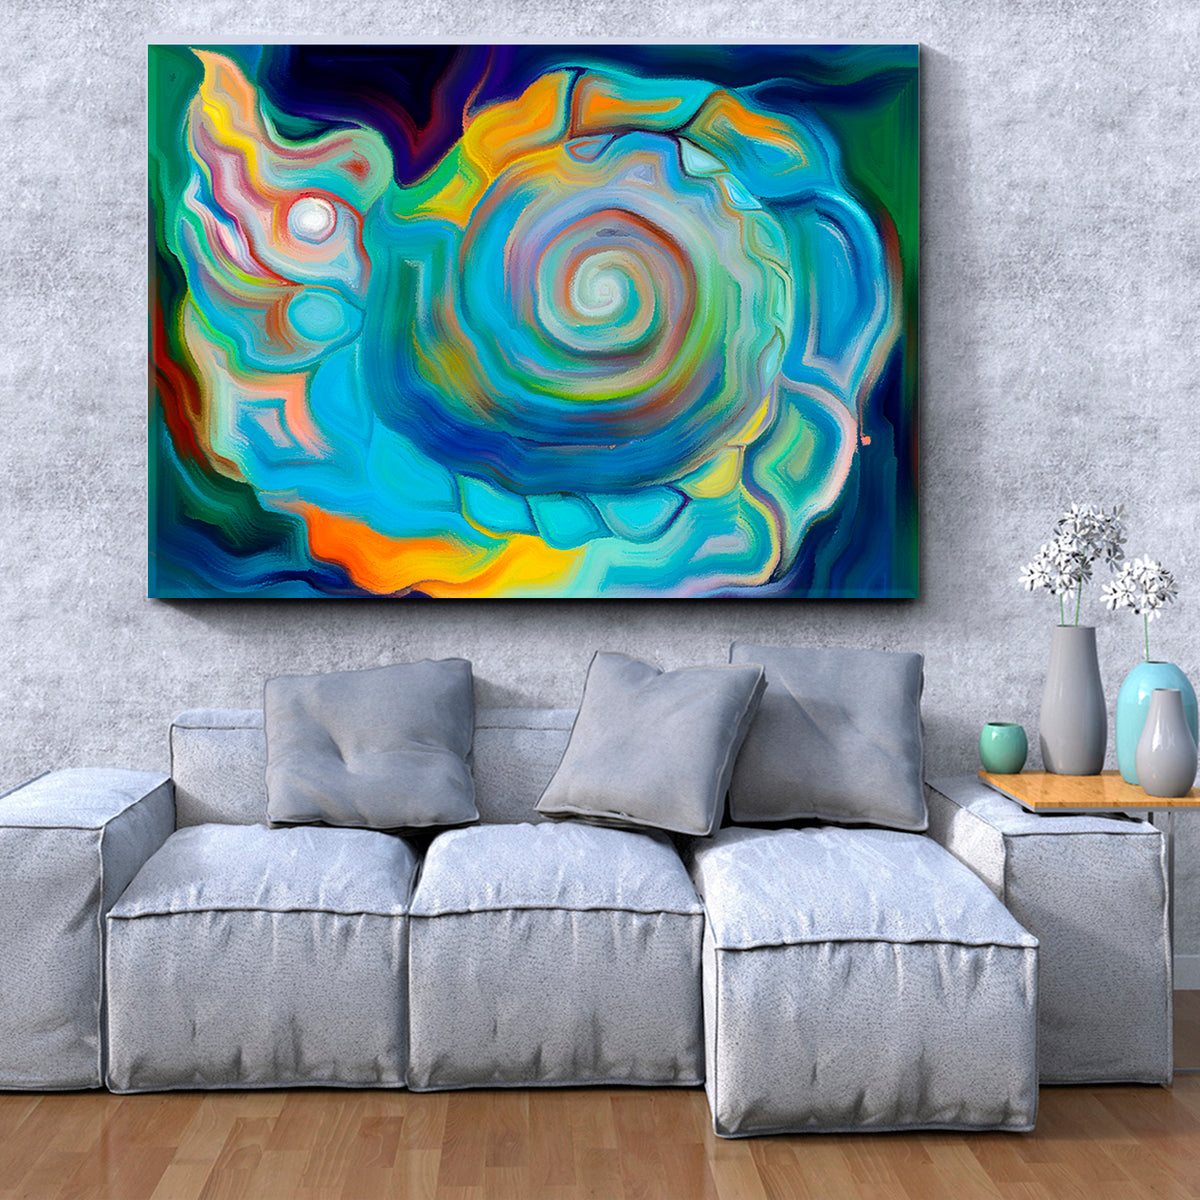 SEA LIFE IN FORMS  Abstract Seashell Vivid Contemporary Abstraction Canvas Print Abstract Art Print Artesty 1 panel 24" x 16" 